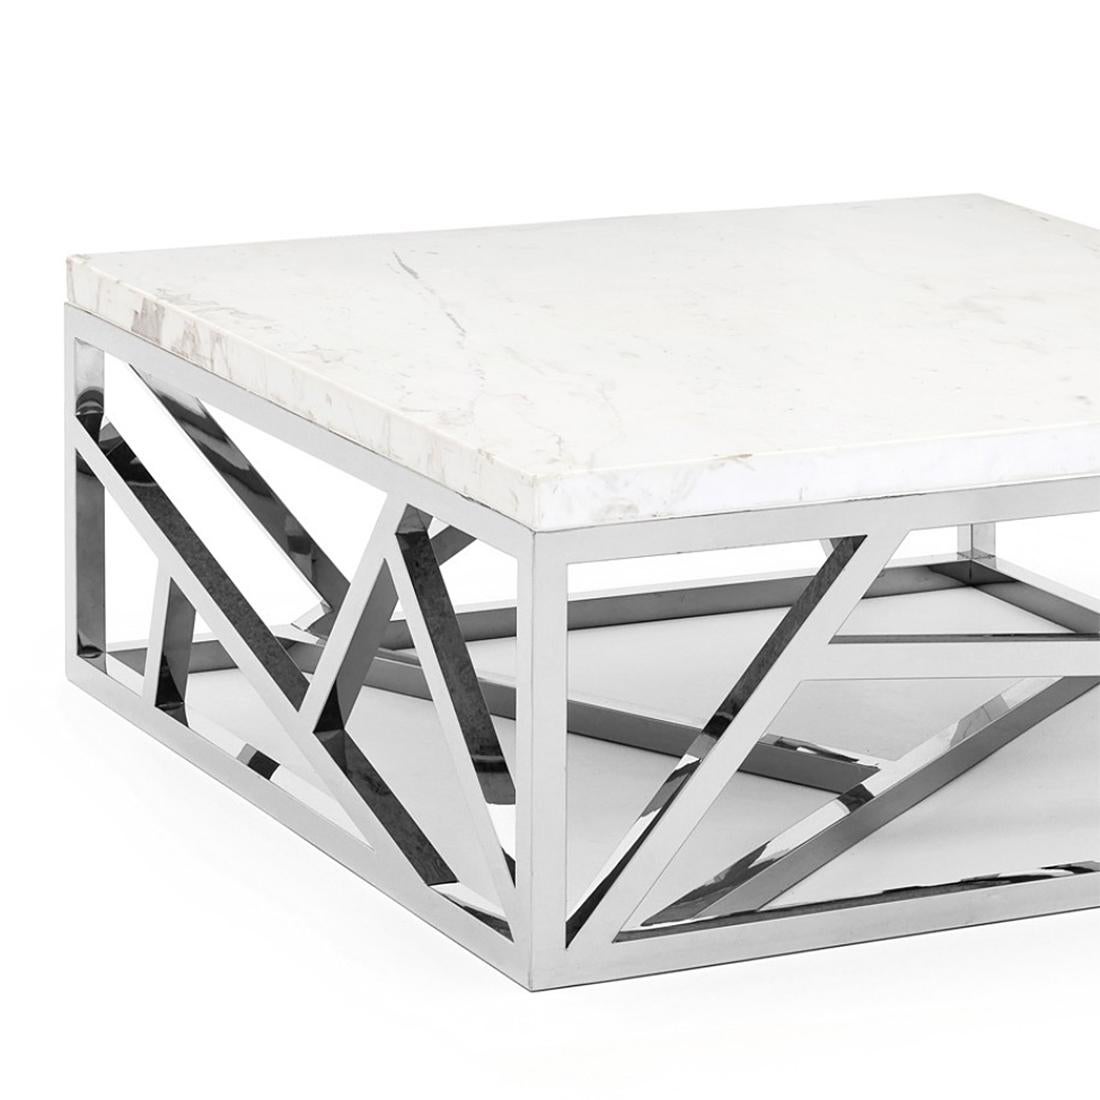 Coffee table Raytona chrome with metal base
in chrome finish and with white marble top.